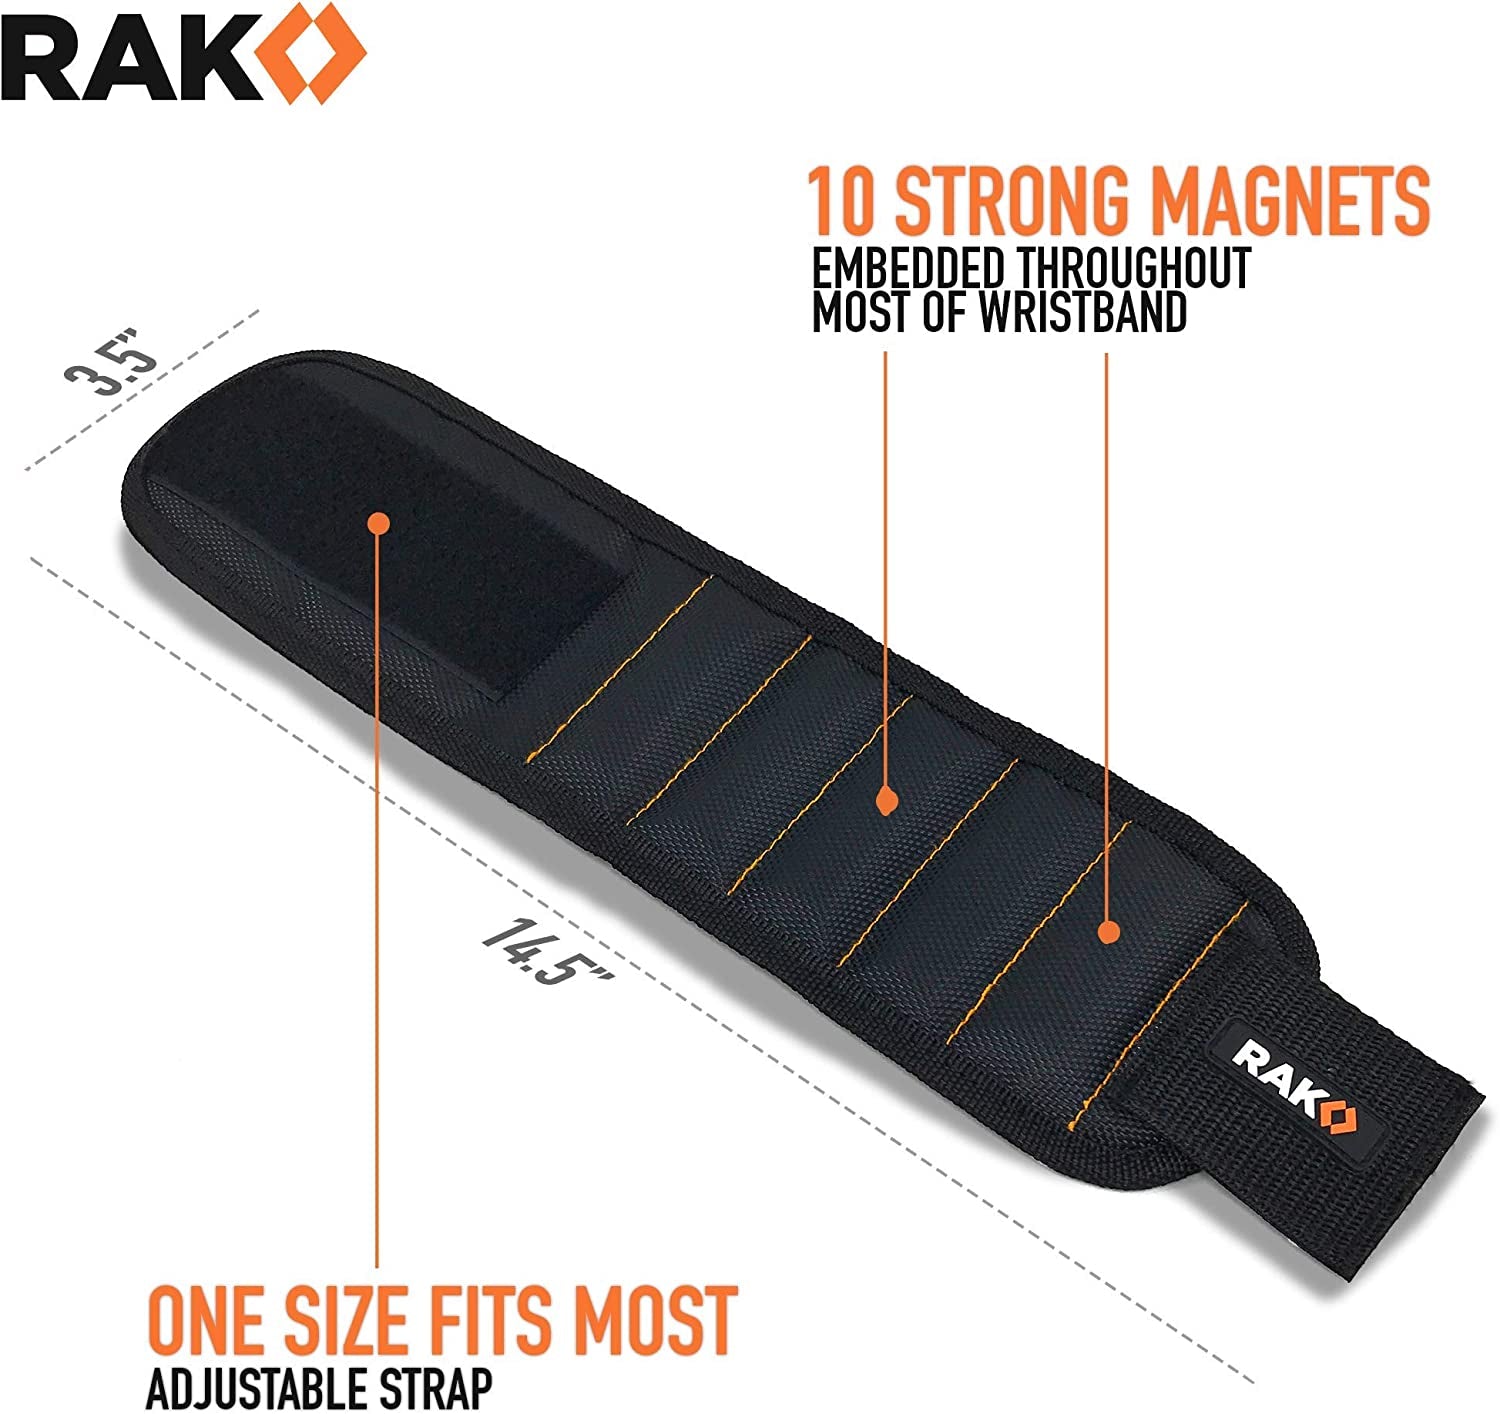 RAK Magnetic Wristband for Holding Screws, Nails and Drill Bits - Birthday Gifts for Men - Made from Premium Ballistic Nylon with Lightweight Powerful Magnets - Cool Gadget Gifts for Men